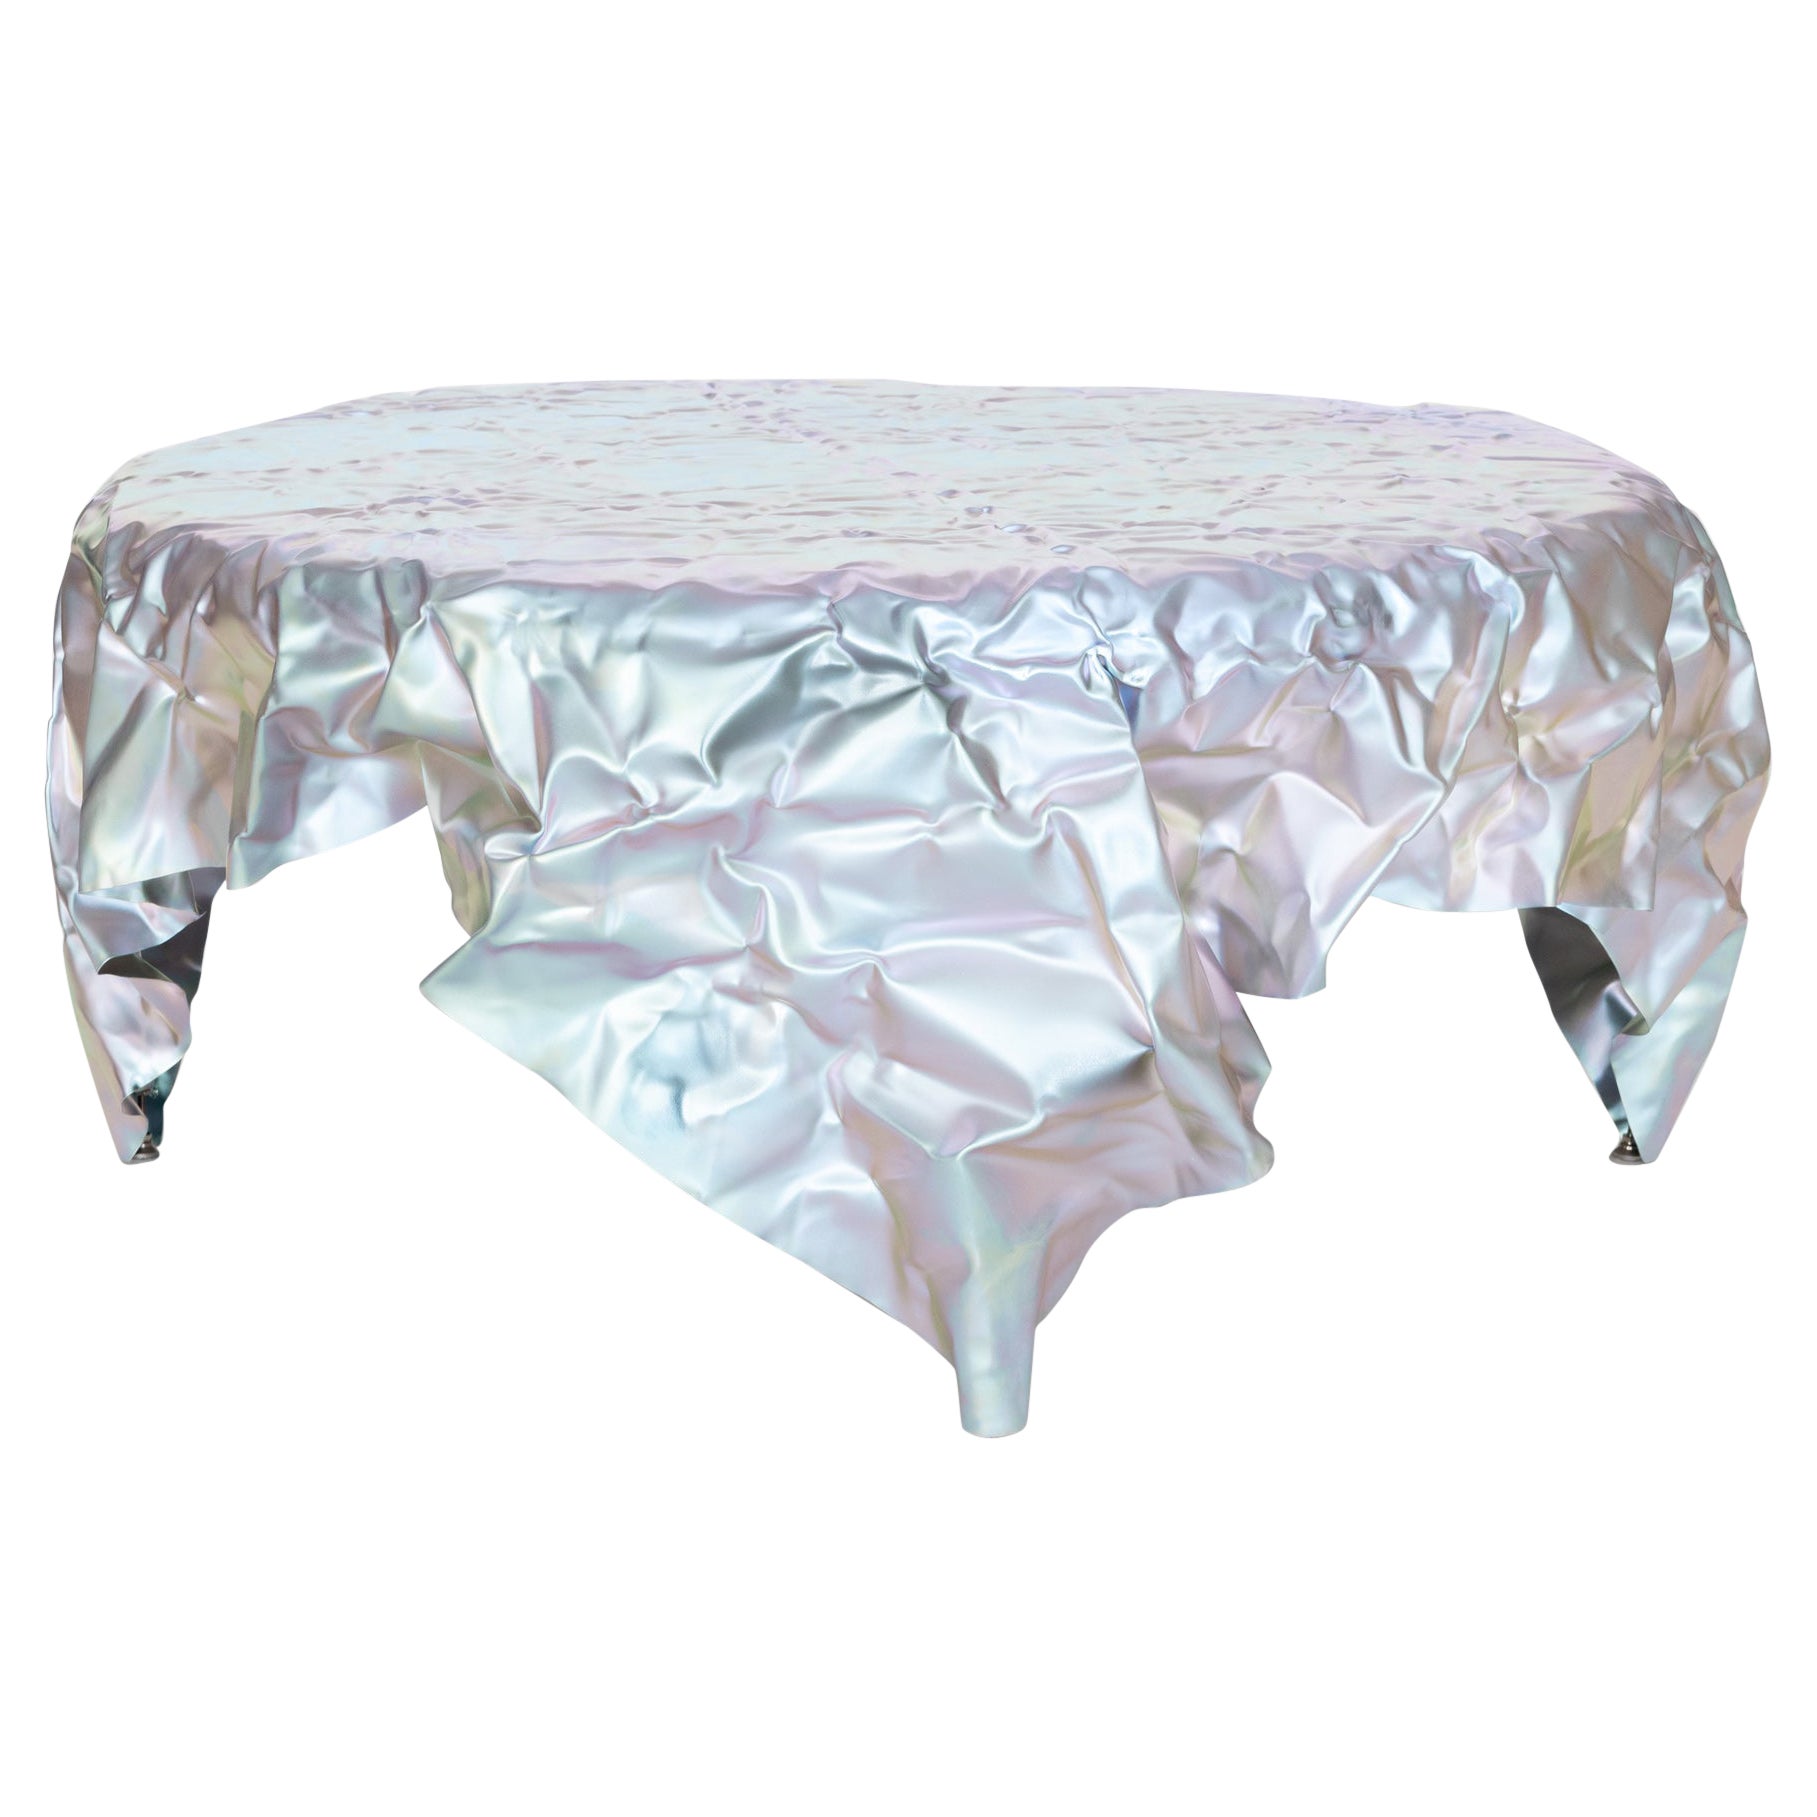 Christopher Prinz “Wrinkled Coffee Table” in Raw Lavender Iridescent 